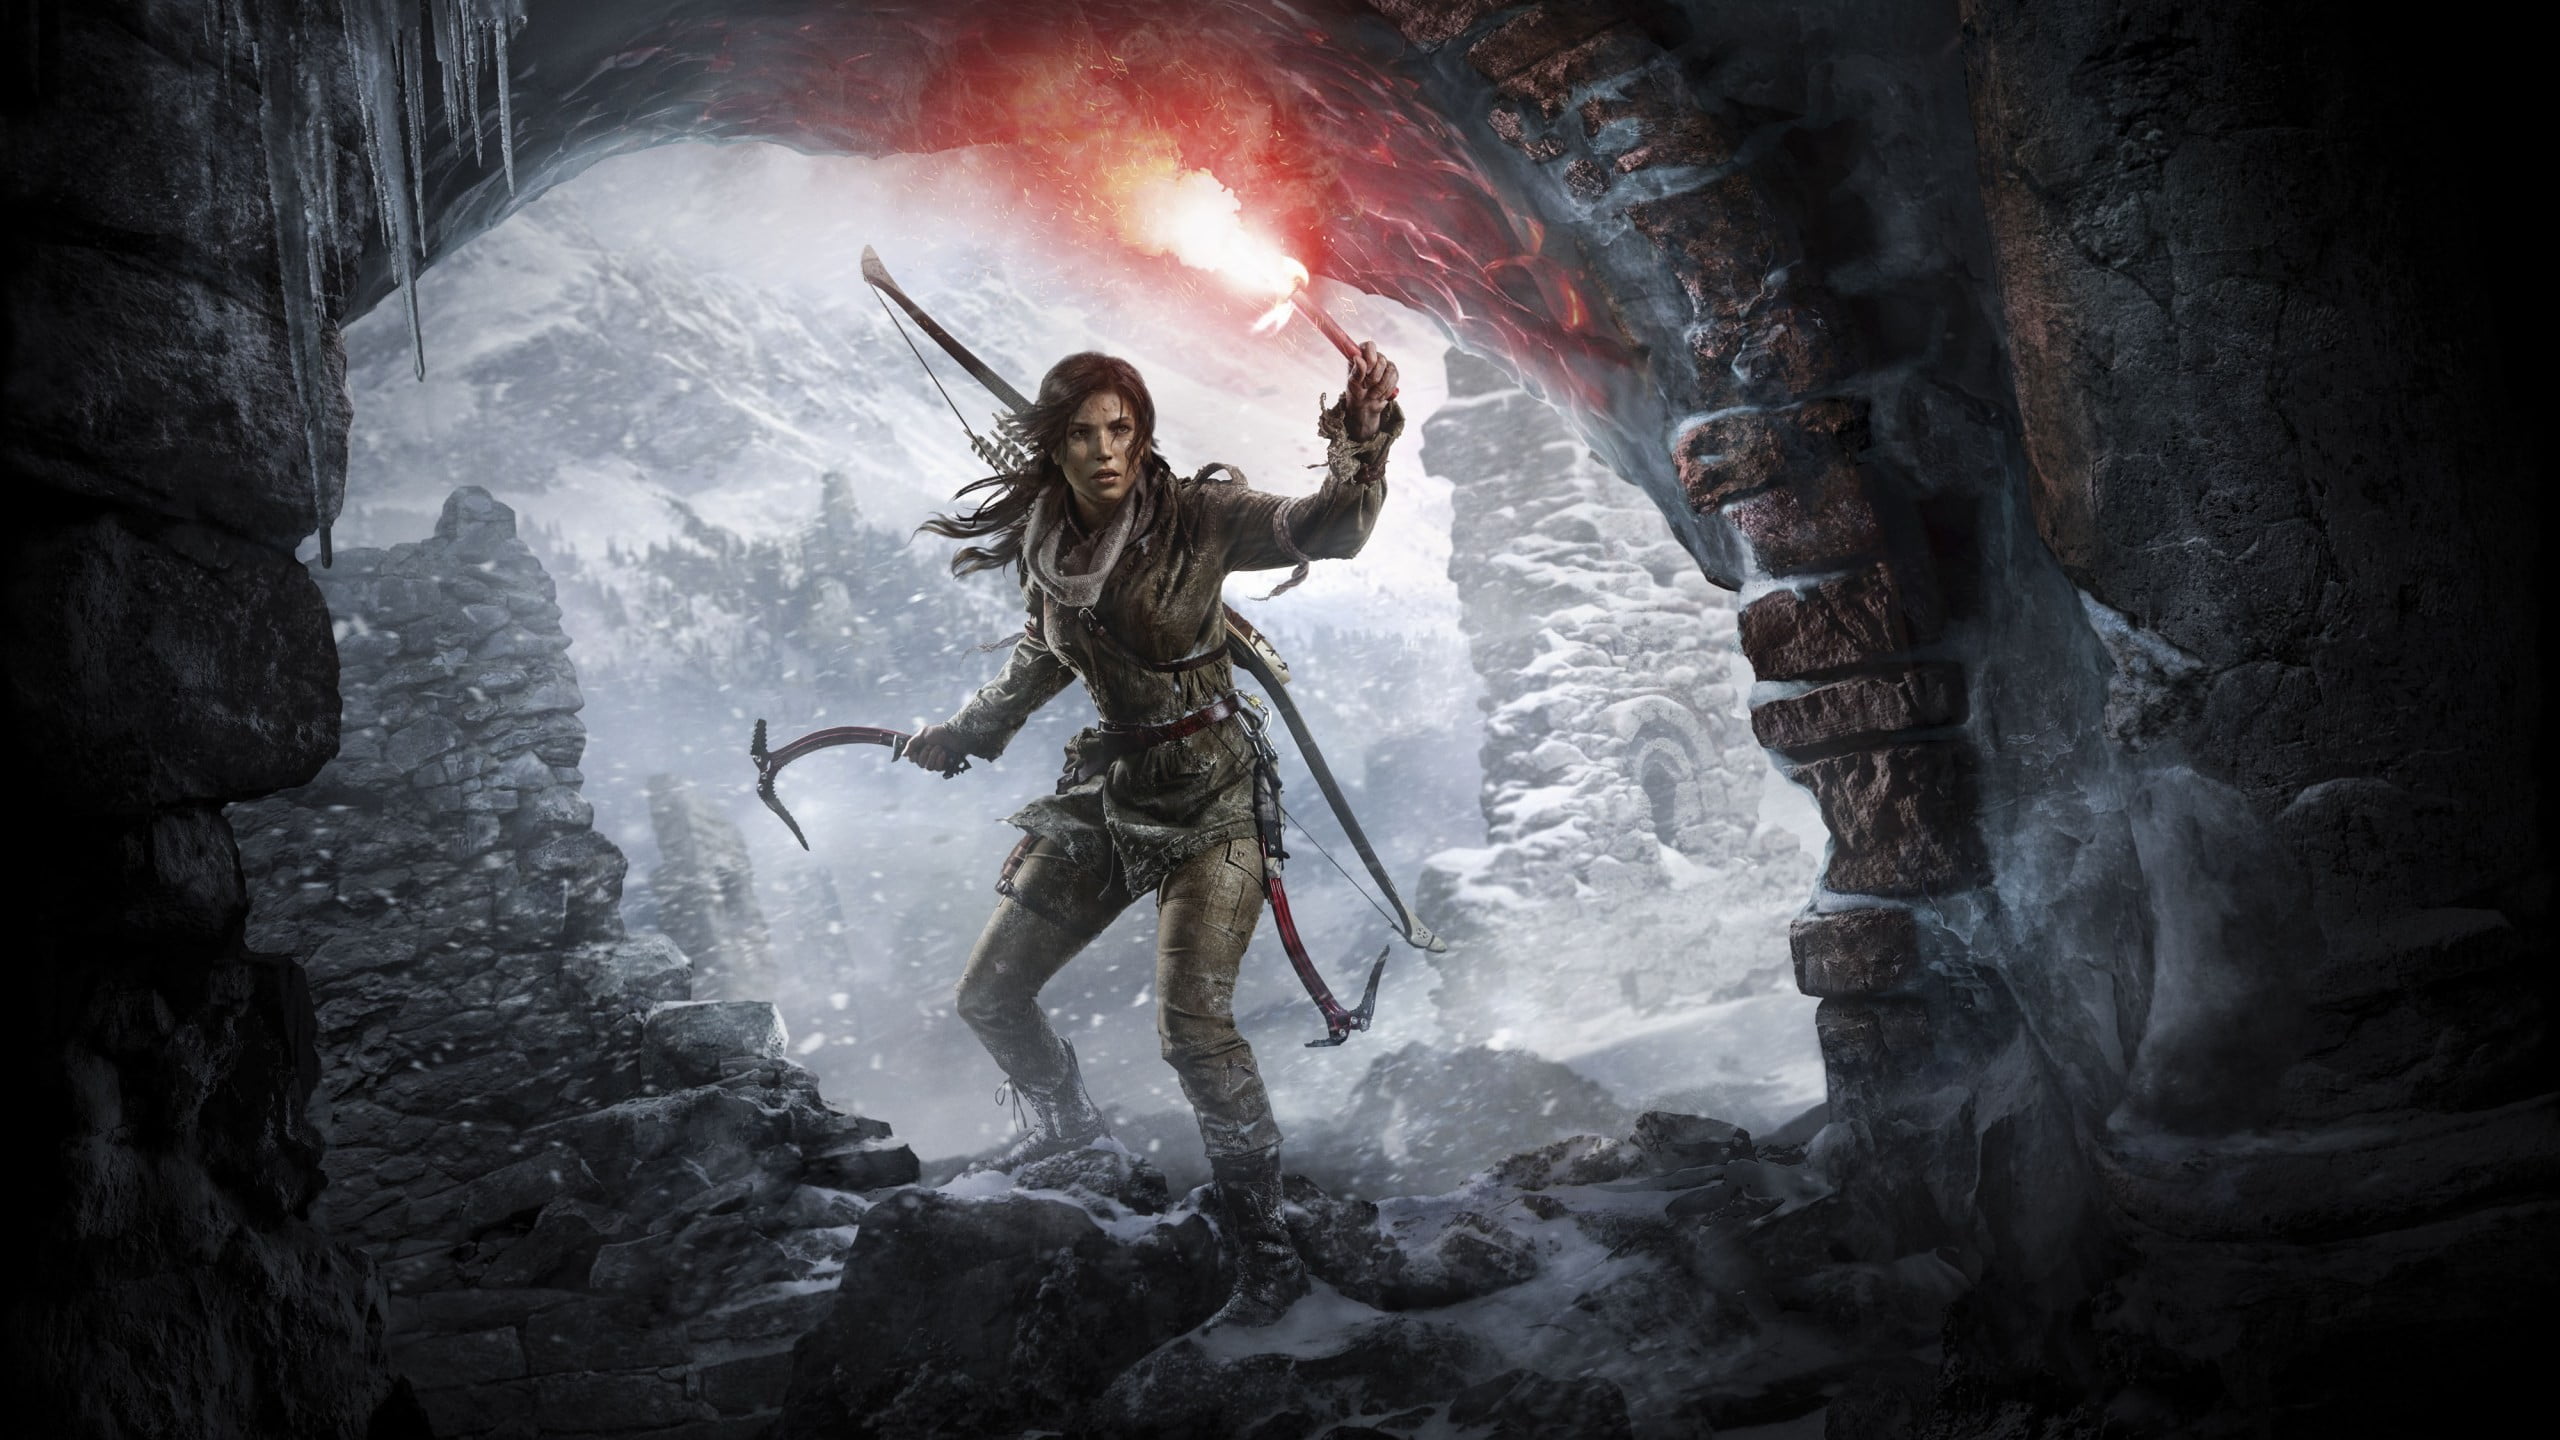 Rise of the Tomb Raider wallpaper, Lara Croft, video games, one person